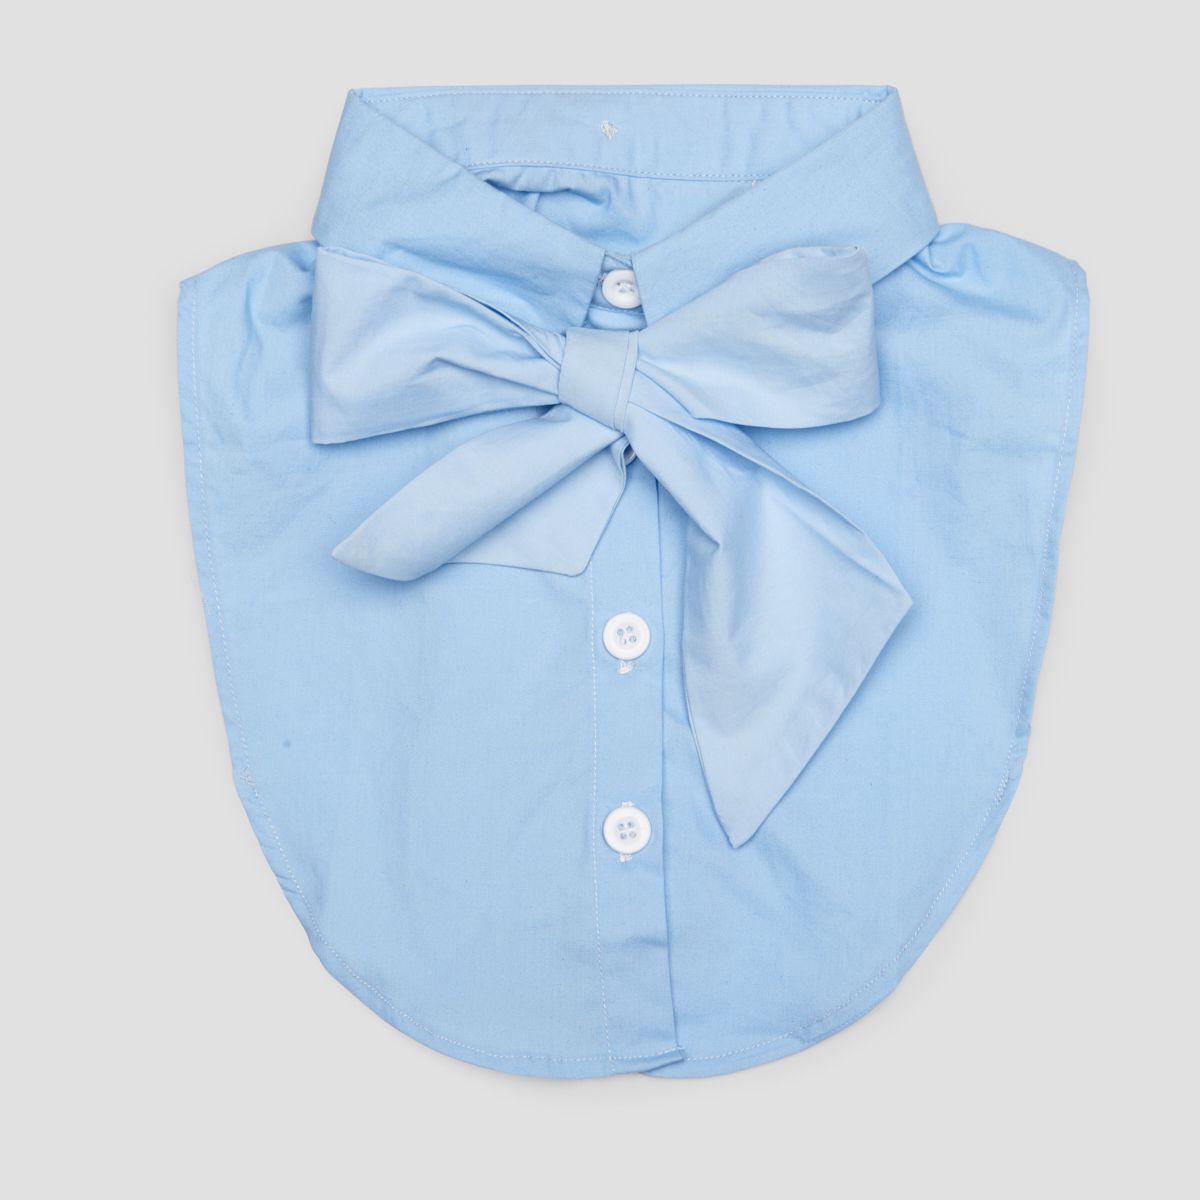 Pinned by K accessoires lichtblauw Meisjes ( - collar baby blue bow) - Junior Steps